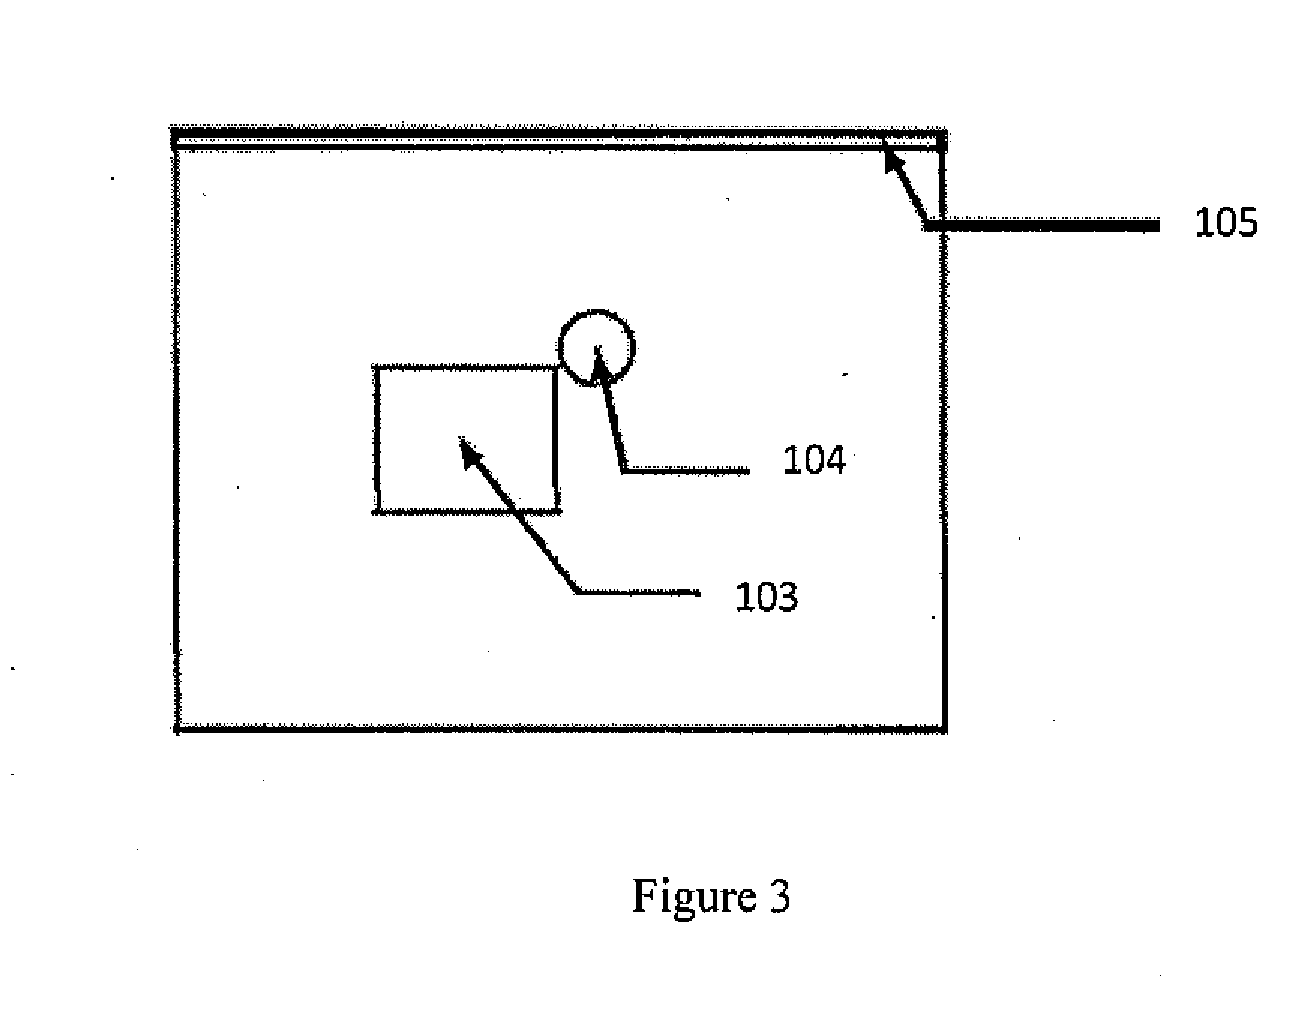 Device and Method for Ambient Storage of Fresh/Frozen Tissue Sections Via Desiccation